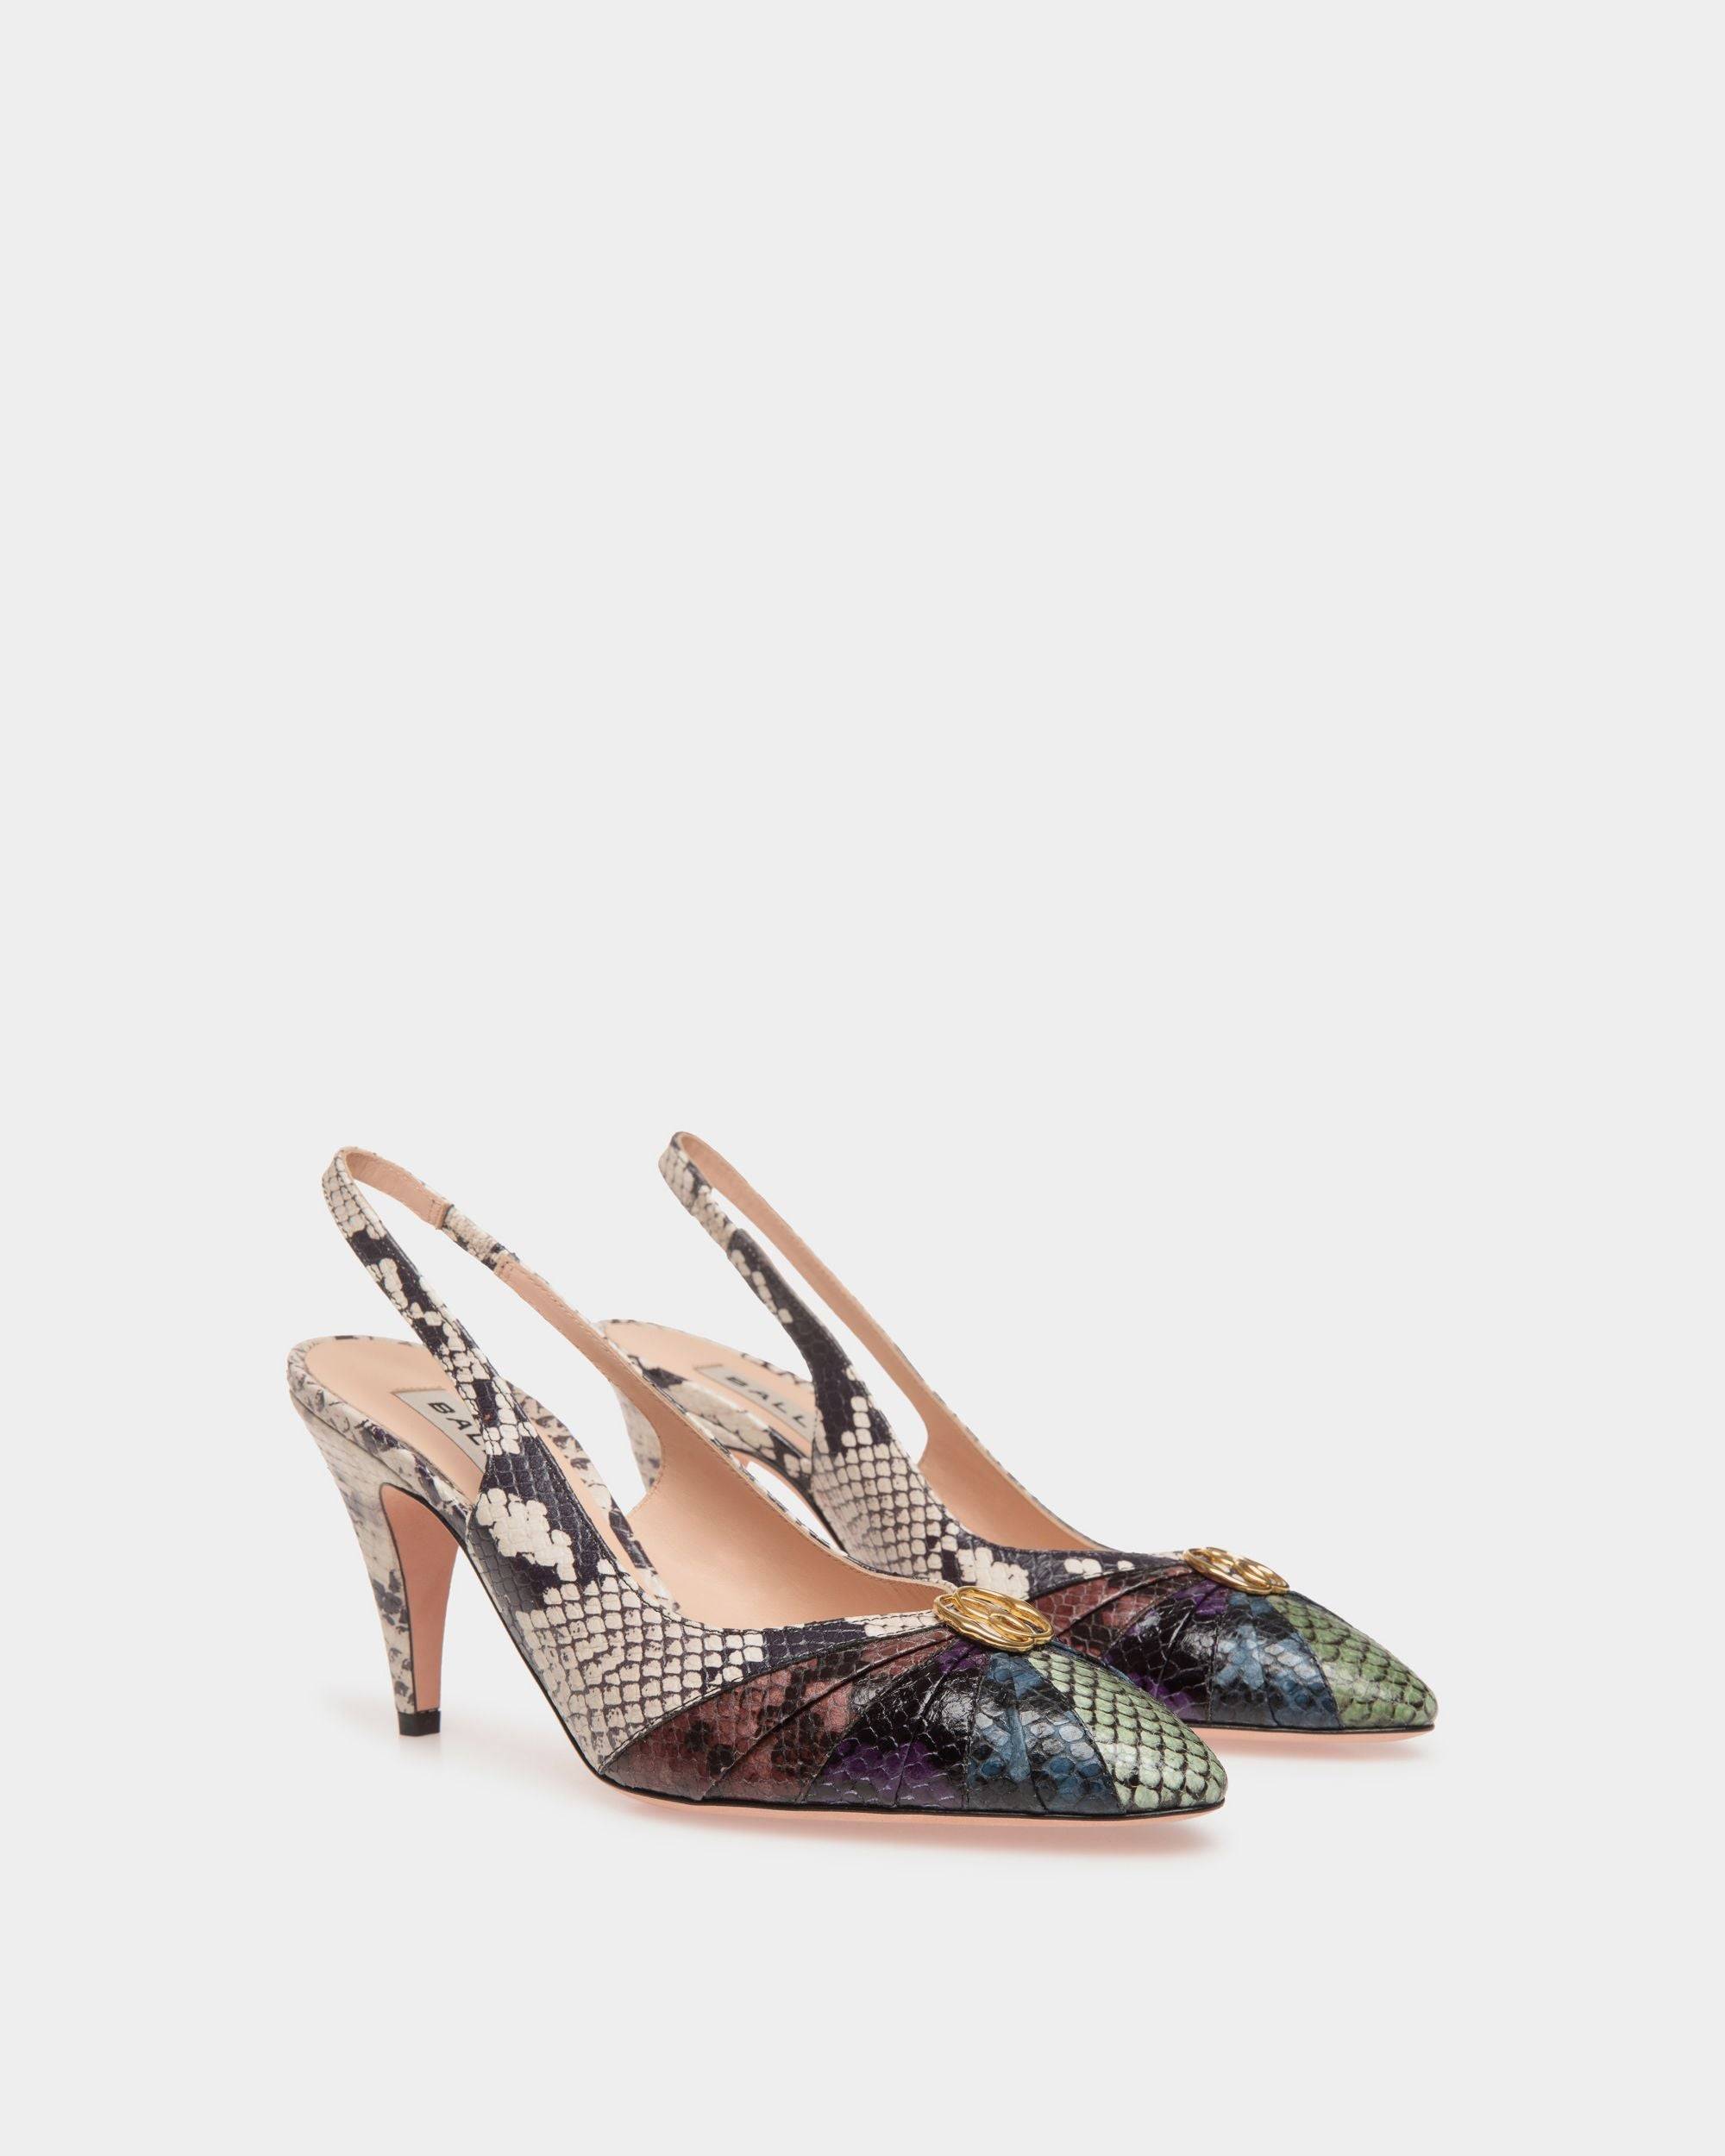 Jolene | Women's Slingback Pump in Multicolor Python Printed Leather | Bally | Still Life 3/4 Front